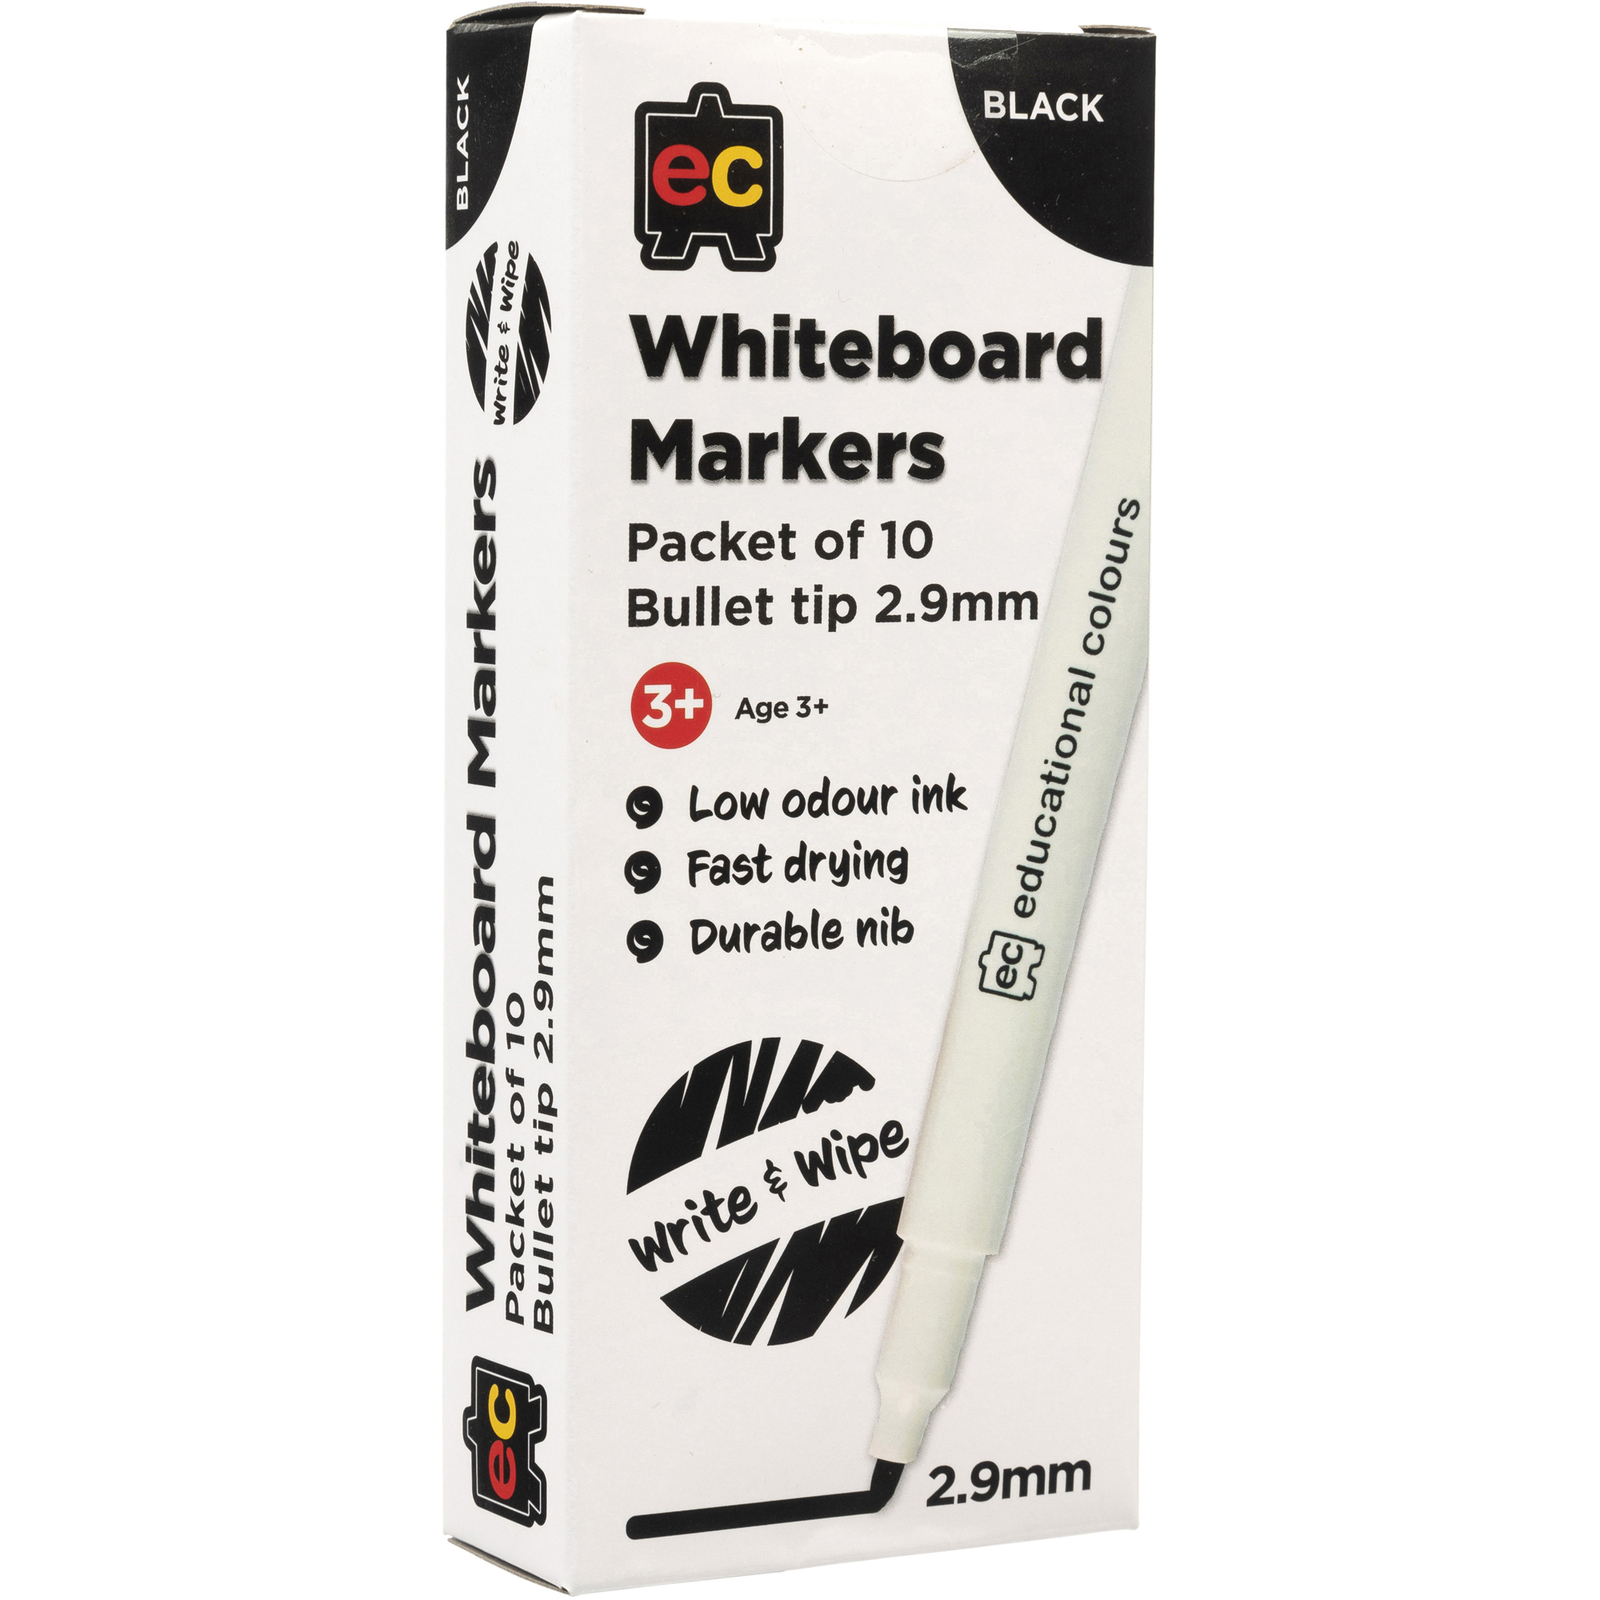 Markers & Highlighters - Staedtler Lumocolor Whiteboard Marker 351 Bullet  Point Assorted Colours Box of 10 - Your Home for Office Supplies &  Stationery in Australia